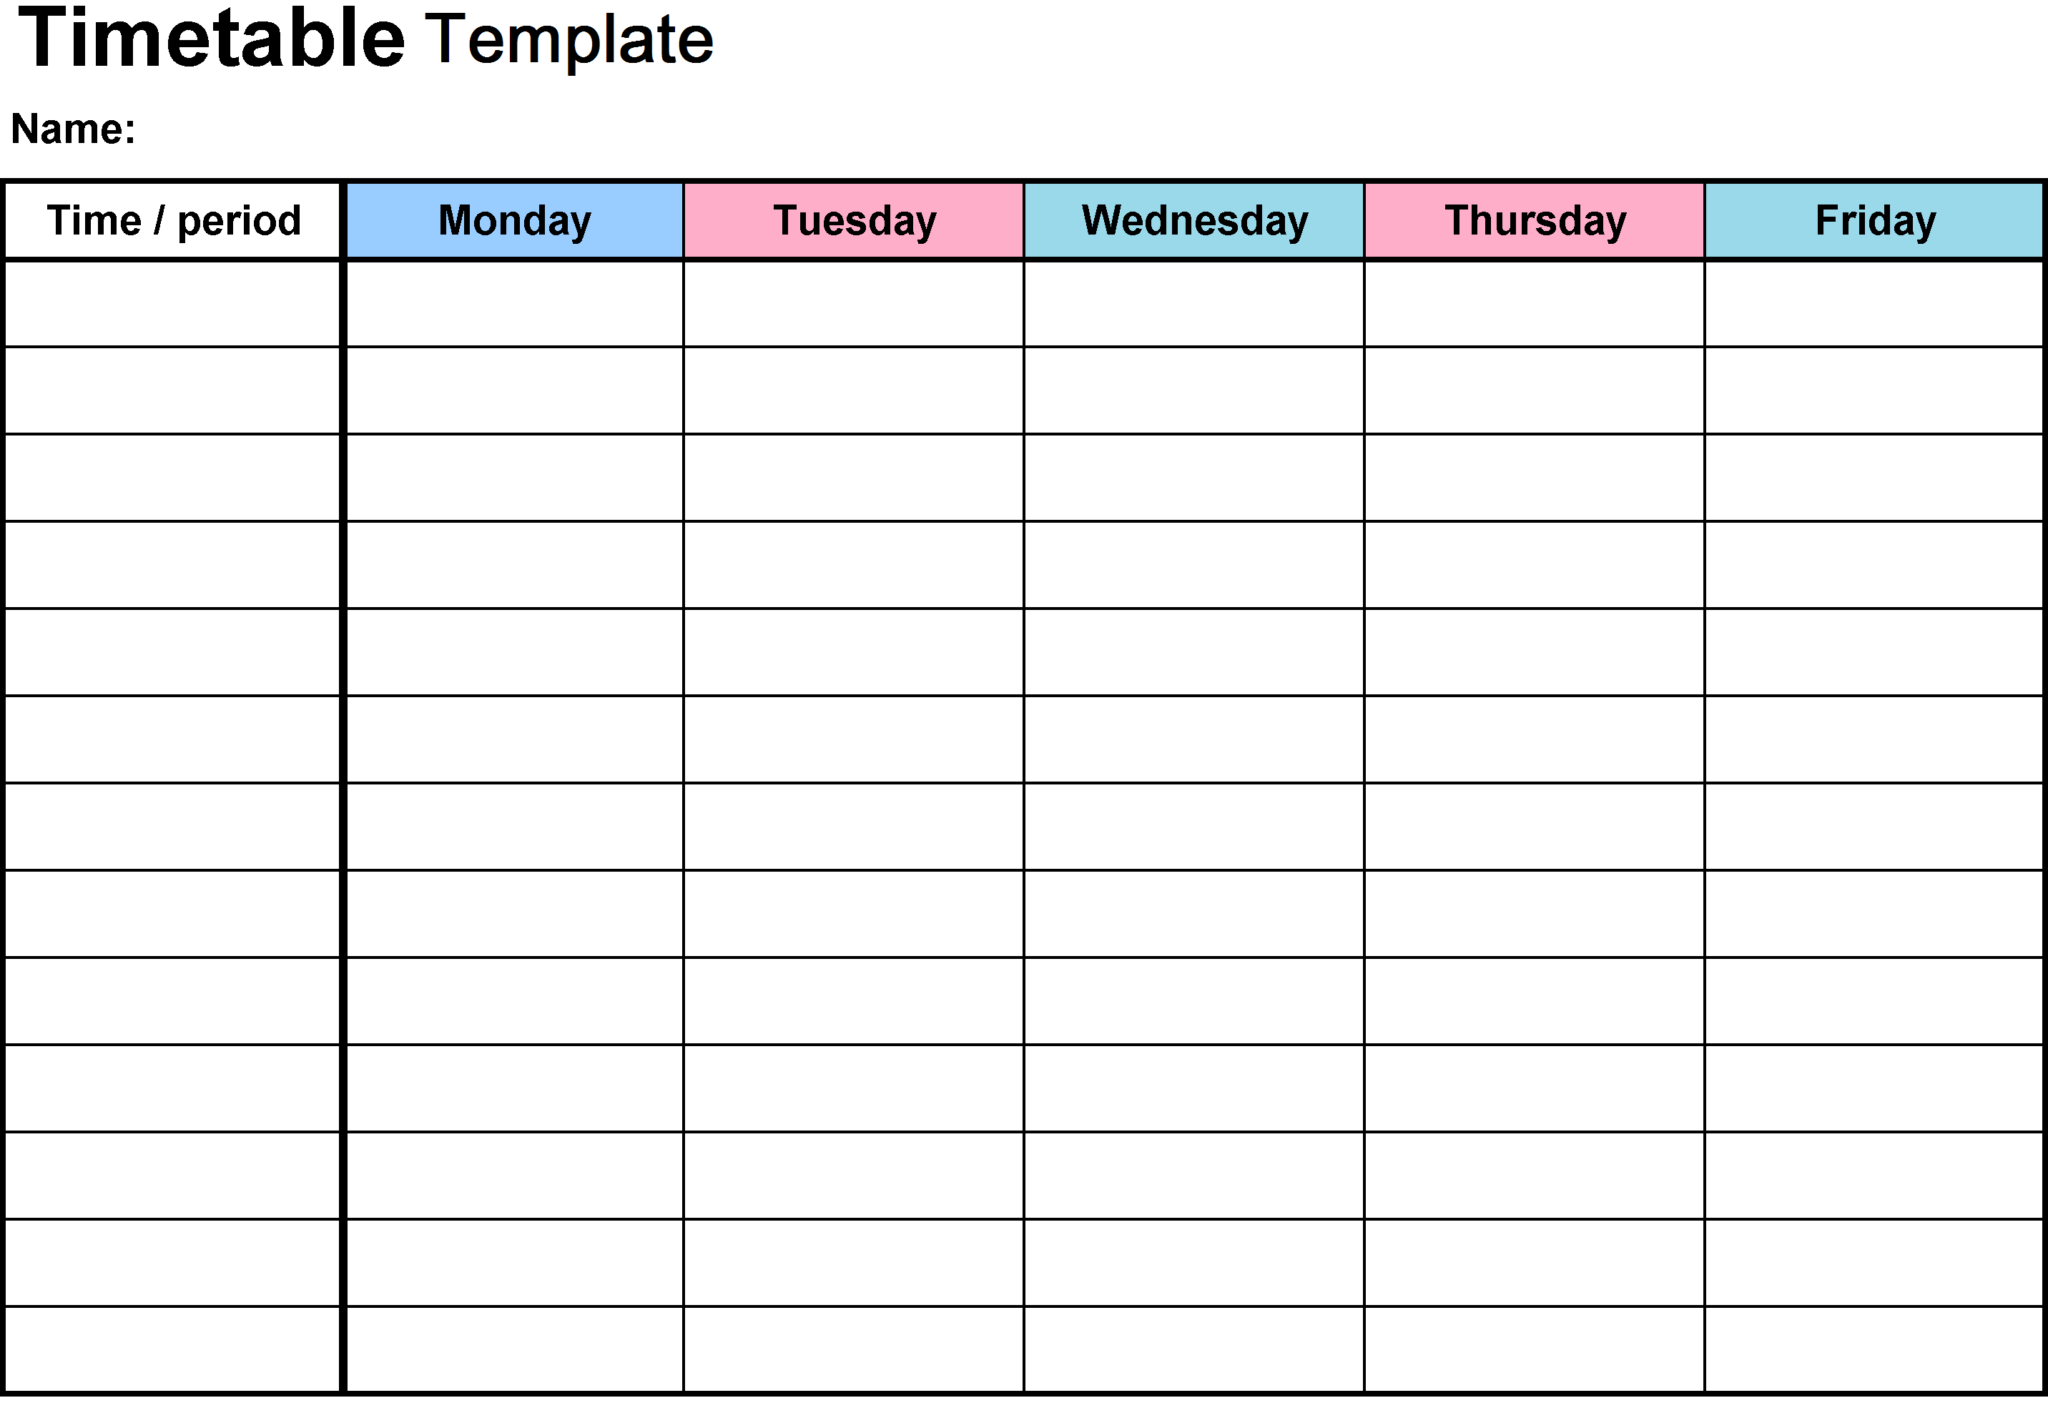 Timetable Template 2018 collegetimetabletemplateword With Blank 